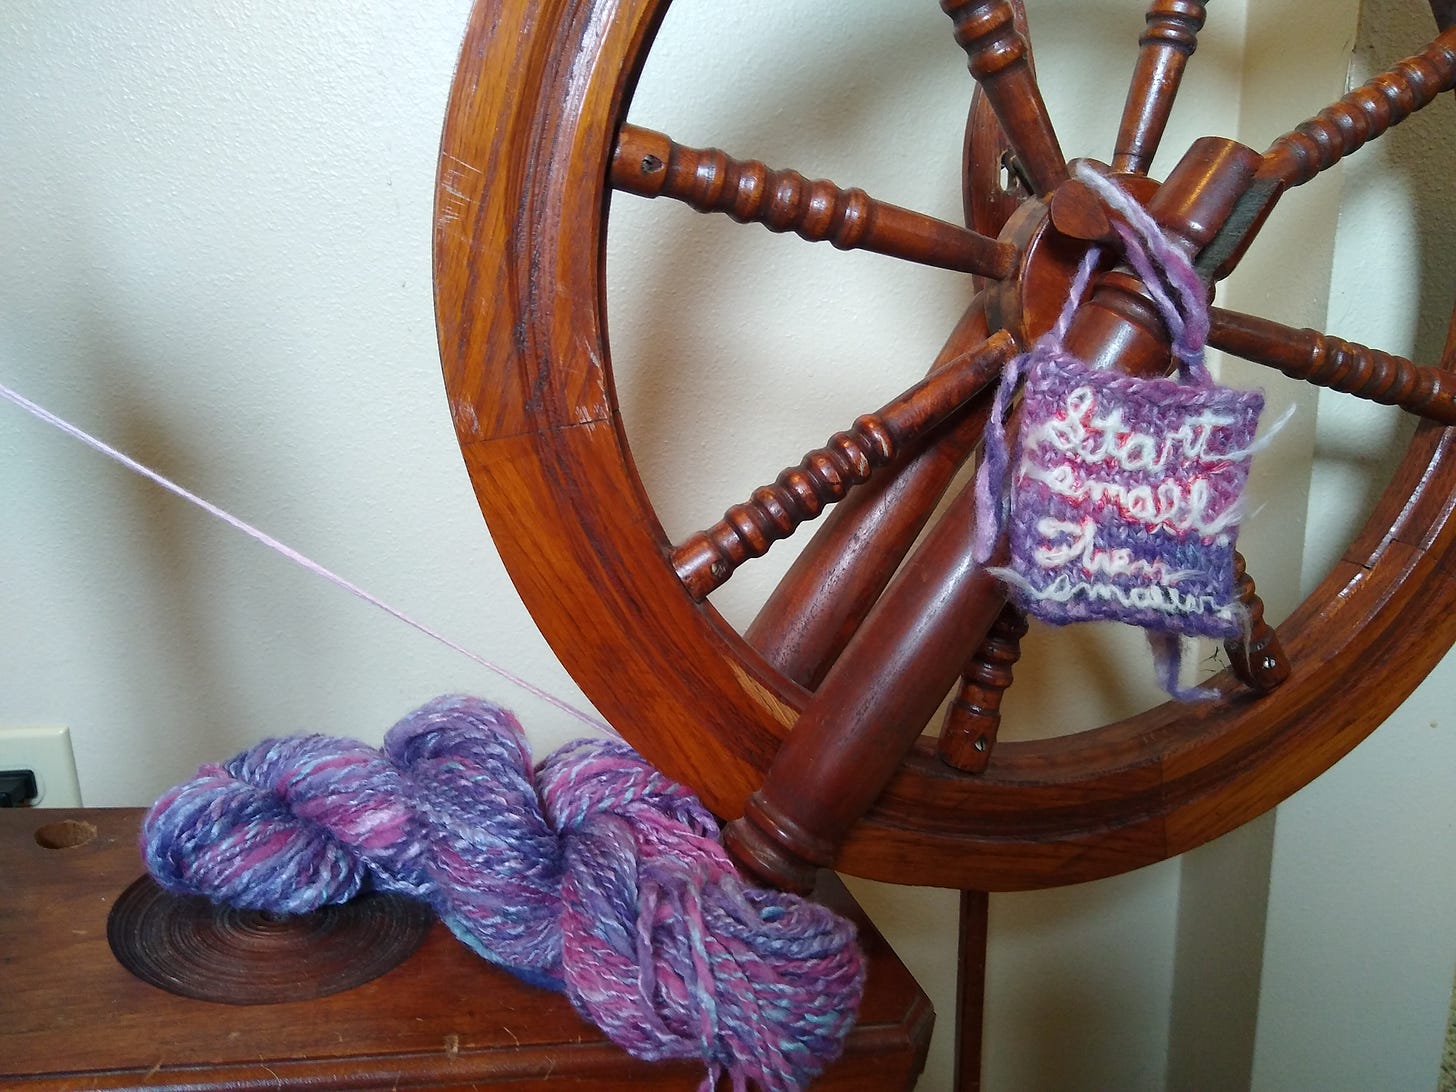 A skein of blue, purple, and pink yarn; a swatch that says "Start small. Then smaller." hanging from a spinning wheel.